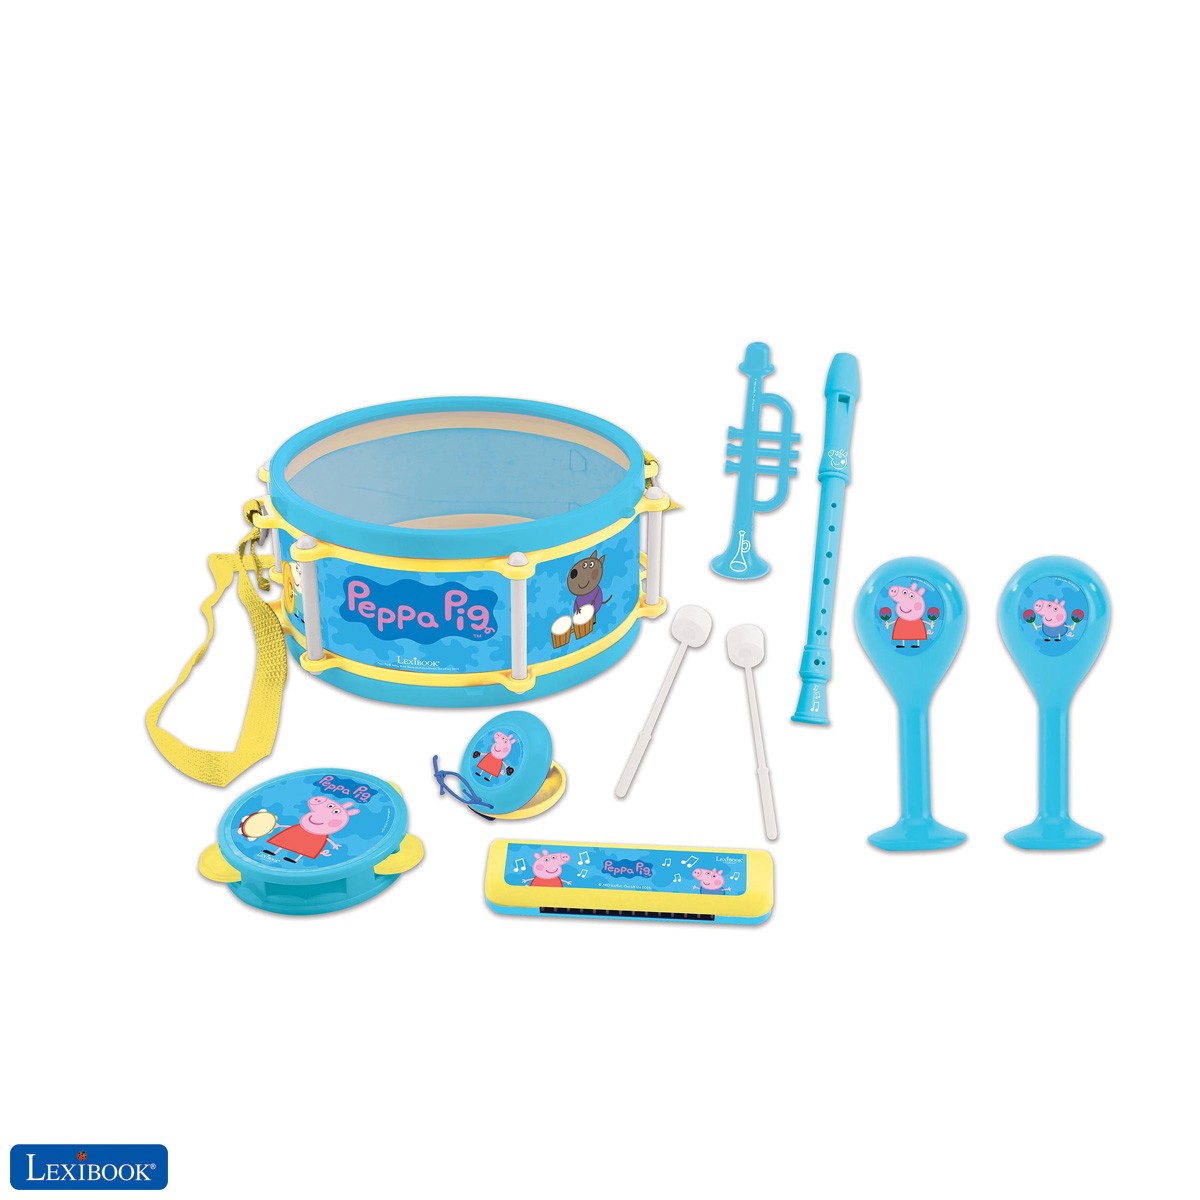 Peppa Pig Georges Musical Toy, Set of 7 music instruments